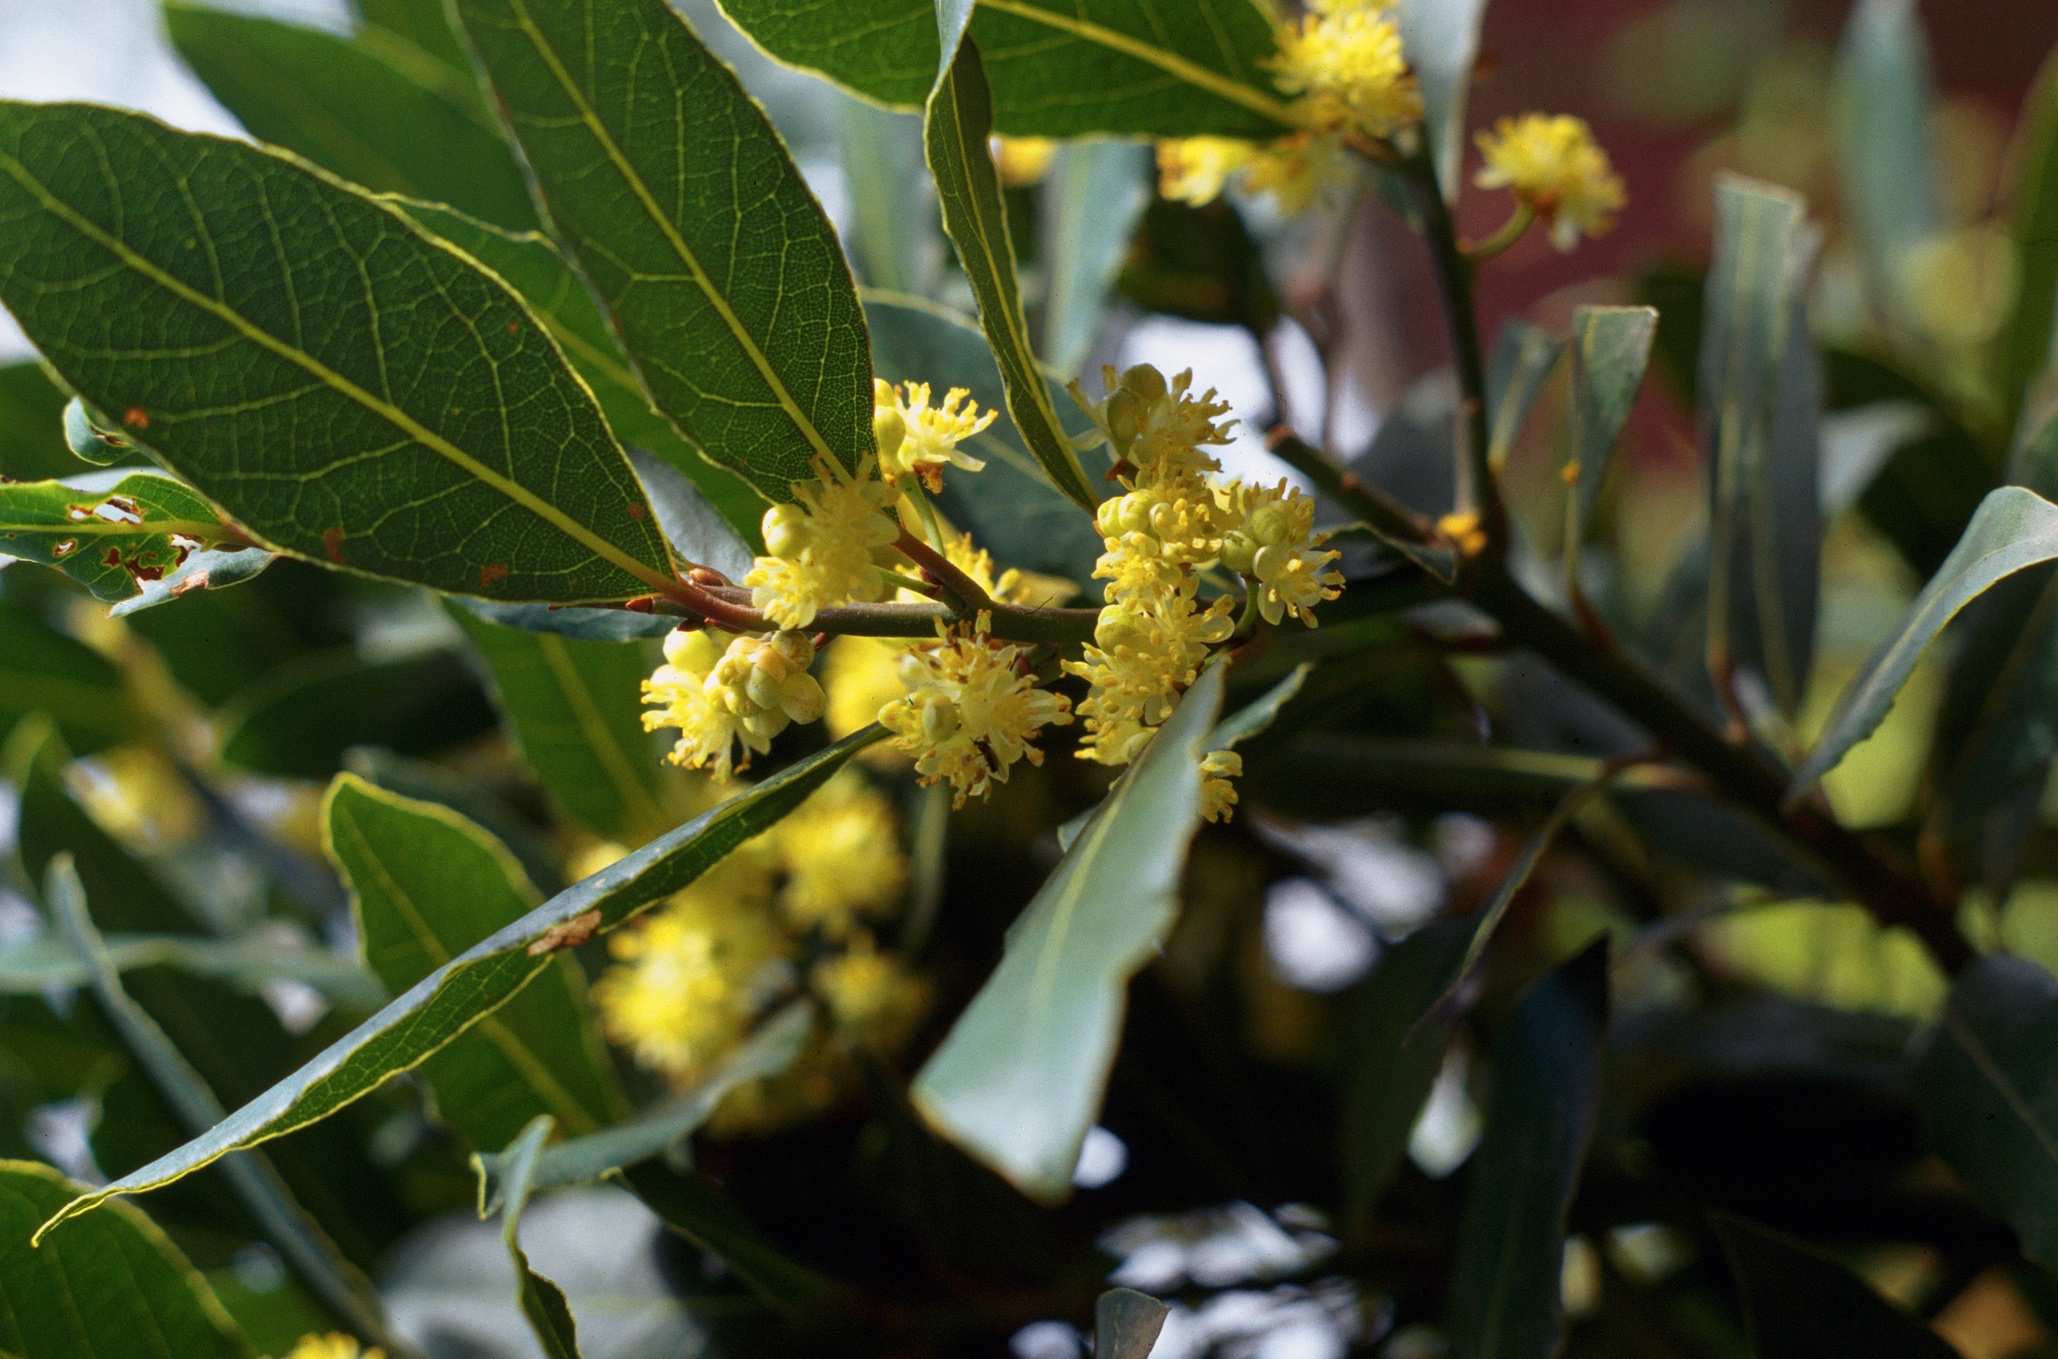 Bay tree leaves and flowers